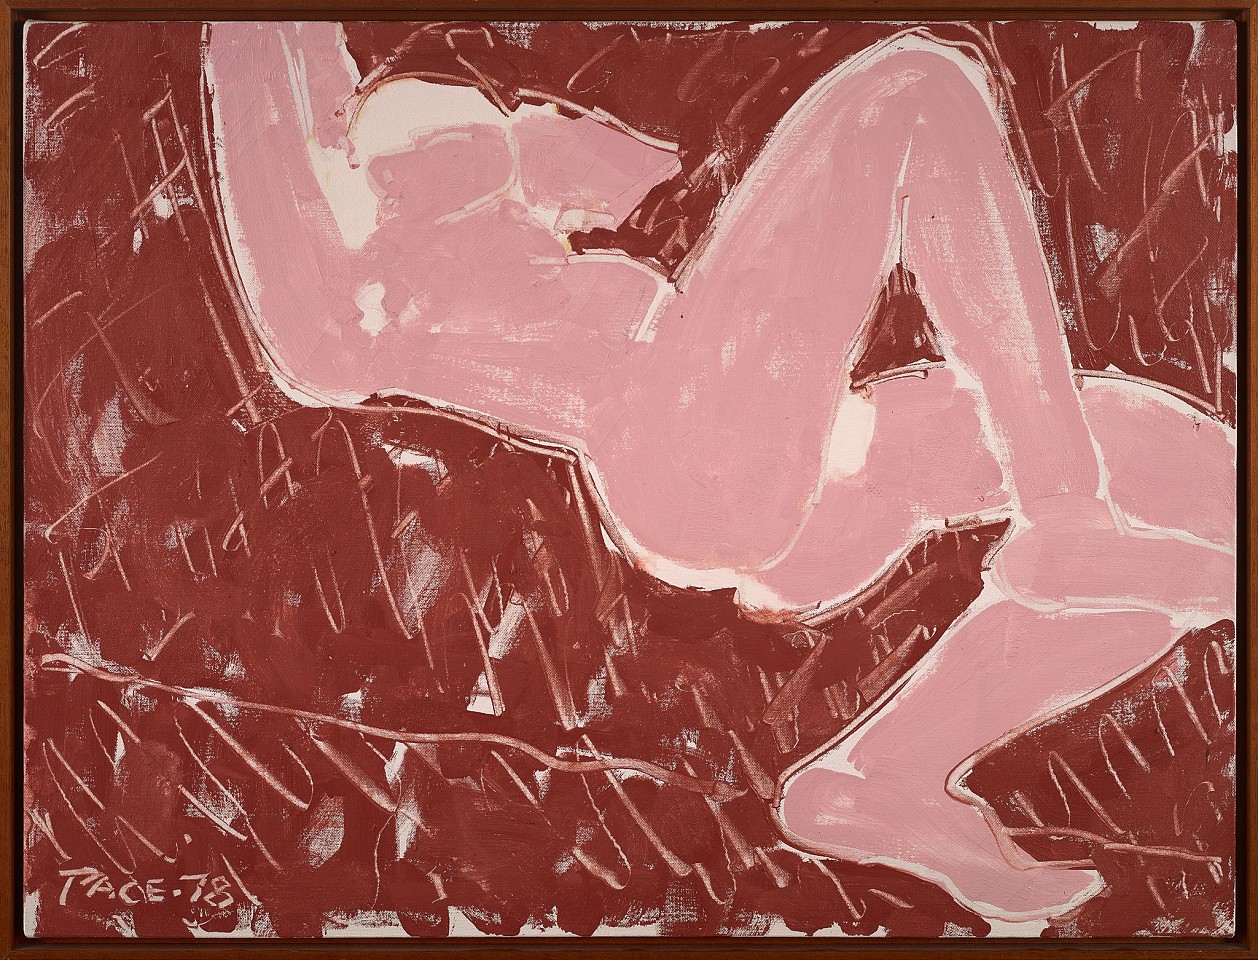 Stephen Pace, Reclining Pink Nude on Terra Cotta, 1978
Oil on canvas, 24 x 32 in. (61 x 81.3 cm)
PAC-00190